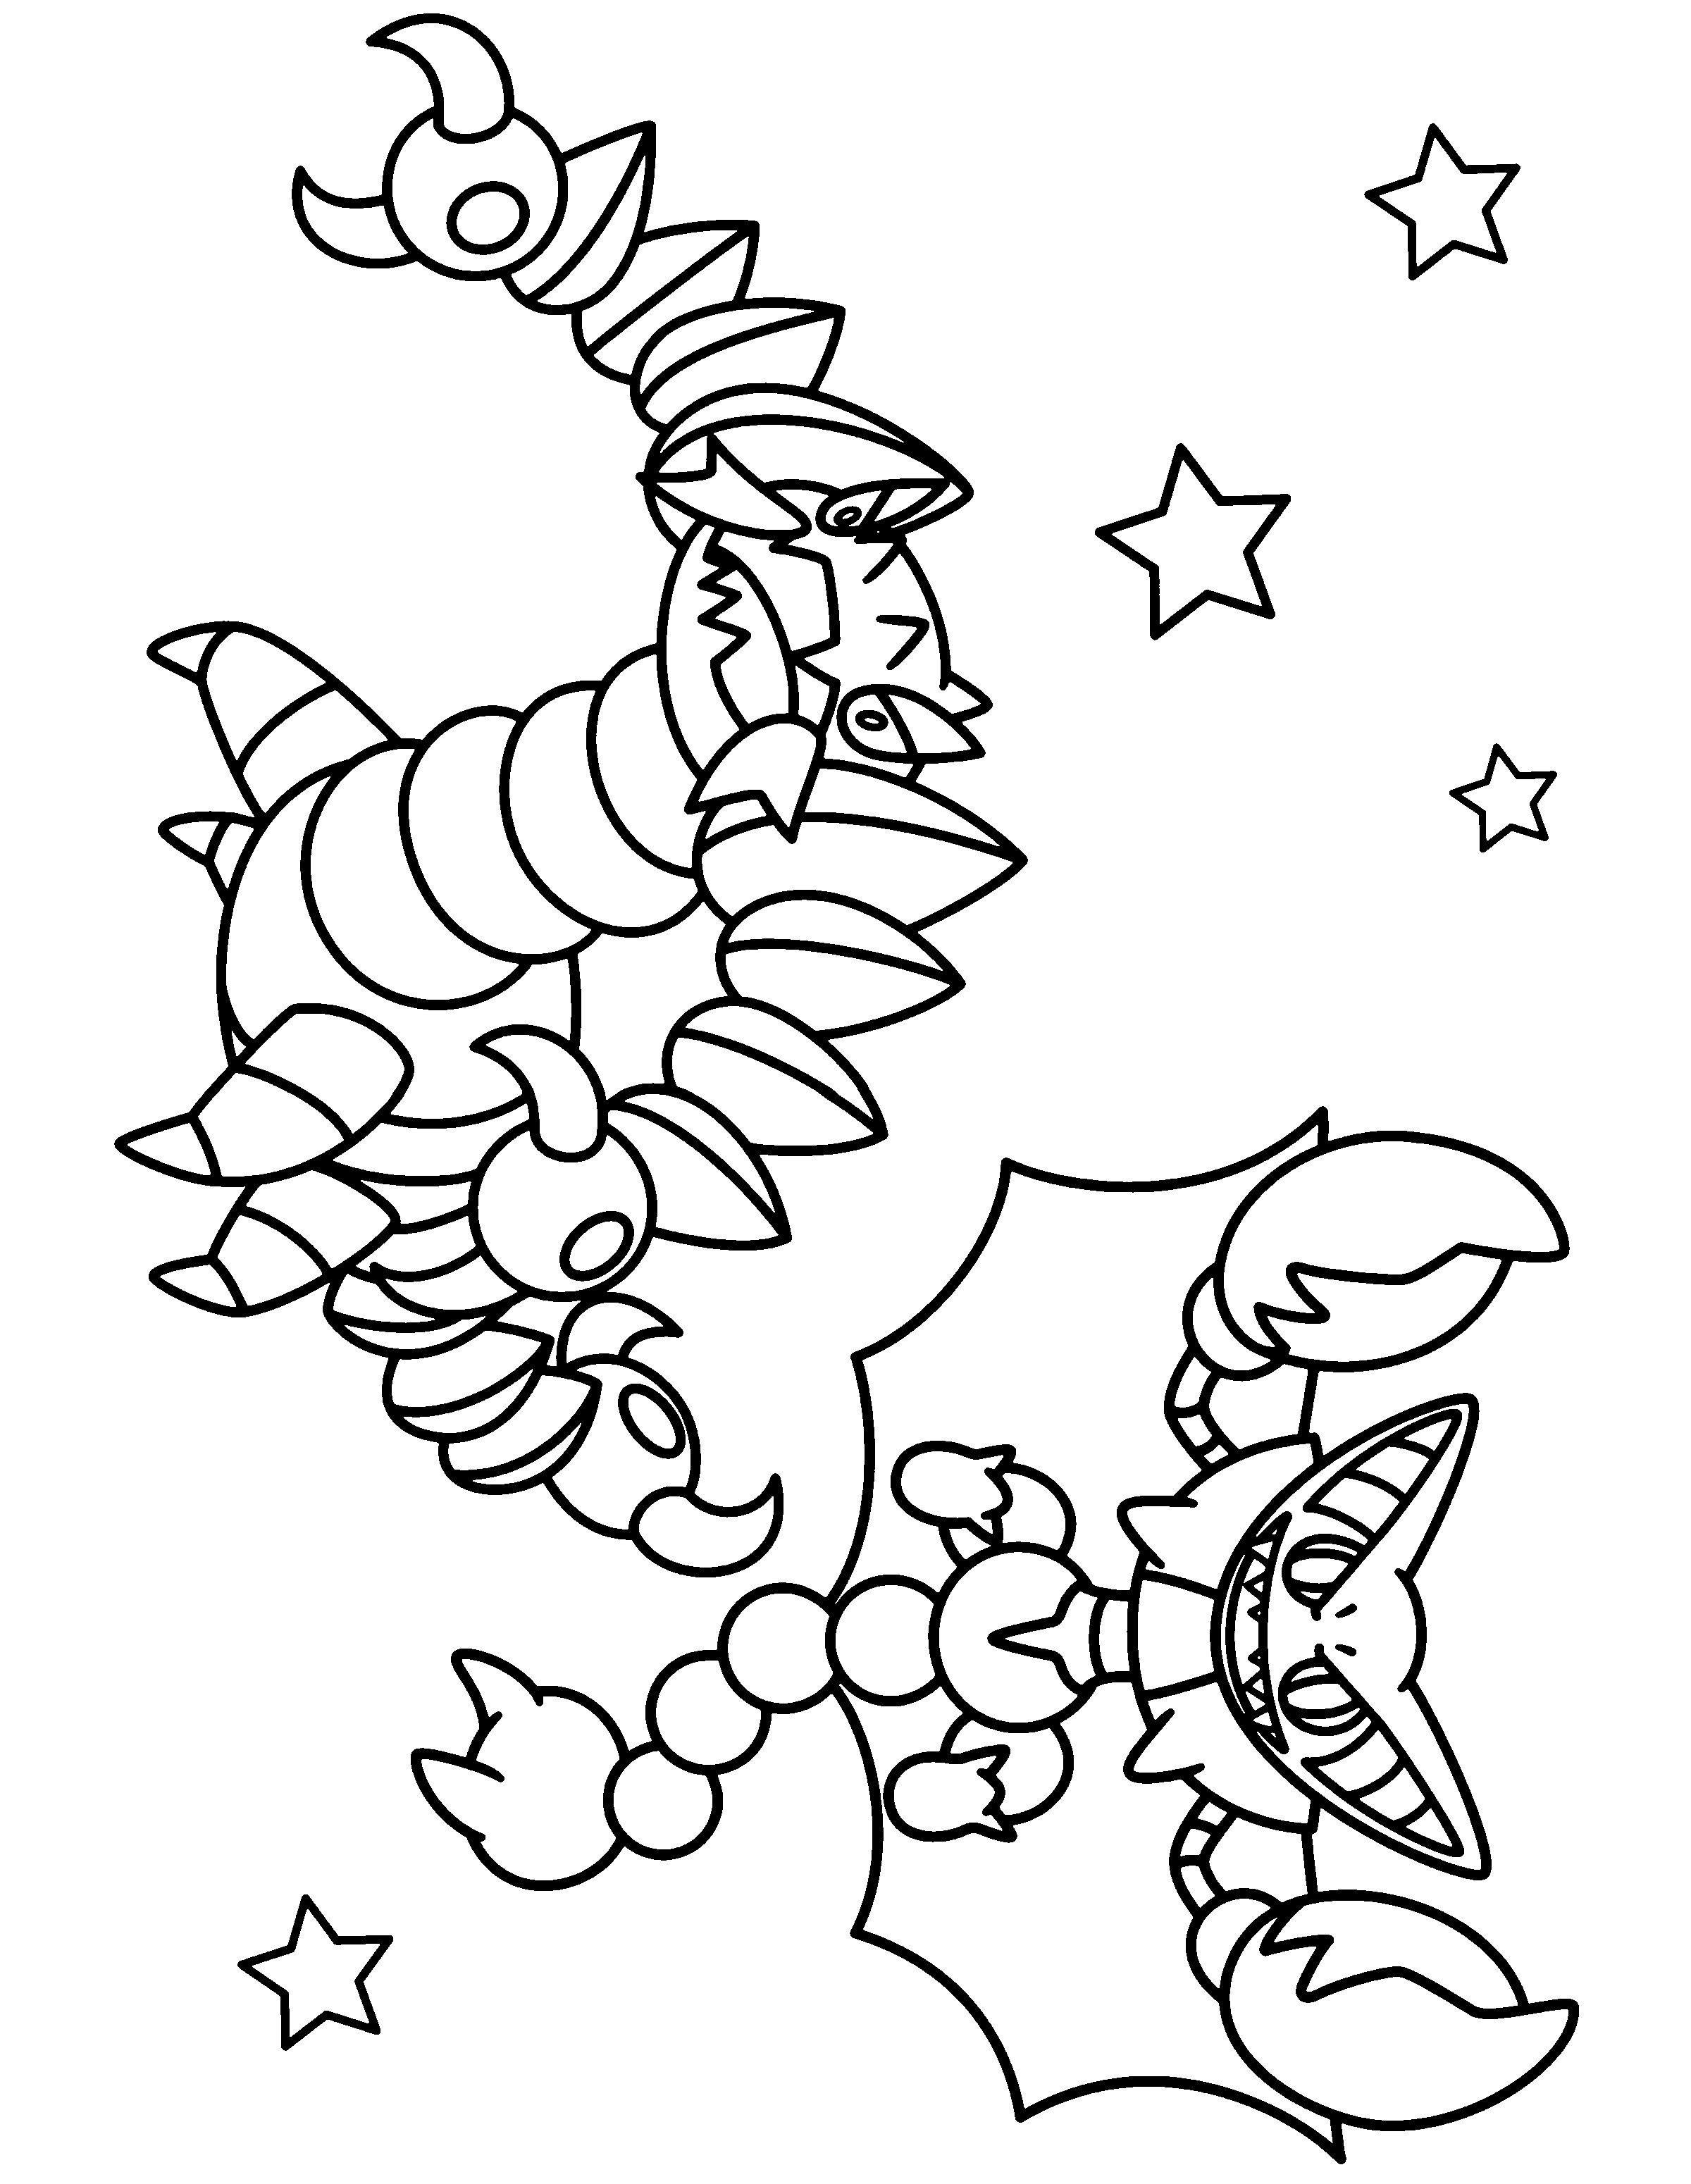 Grotle pokemon coloring pages download and print for free